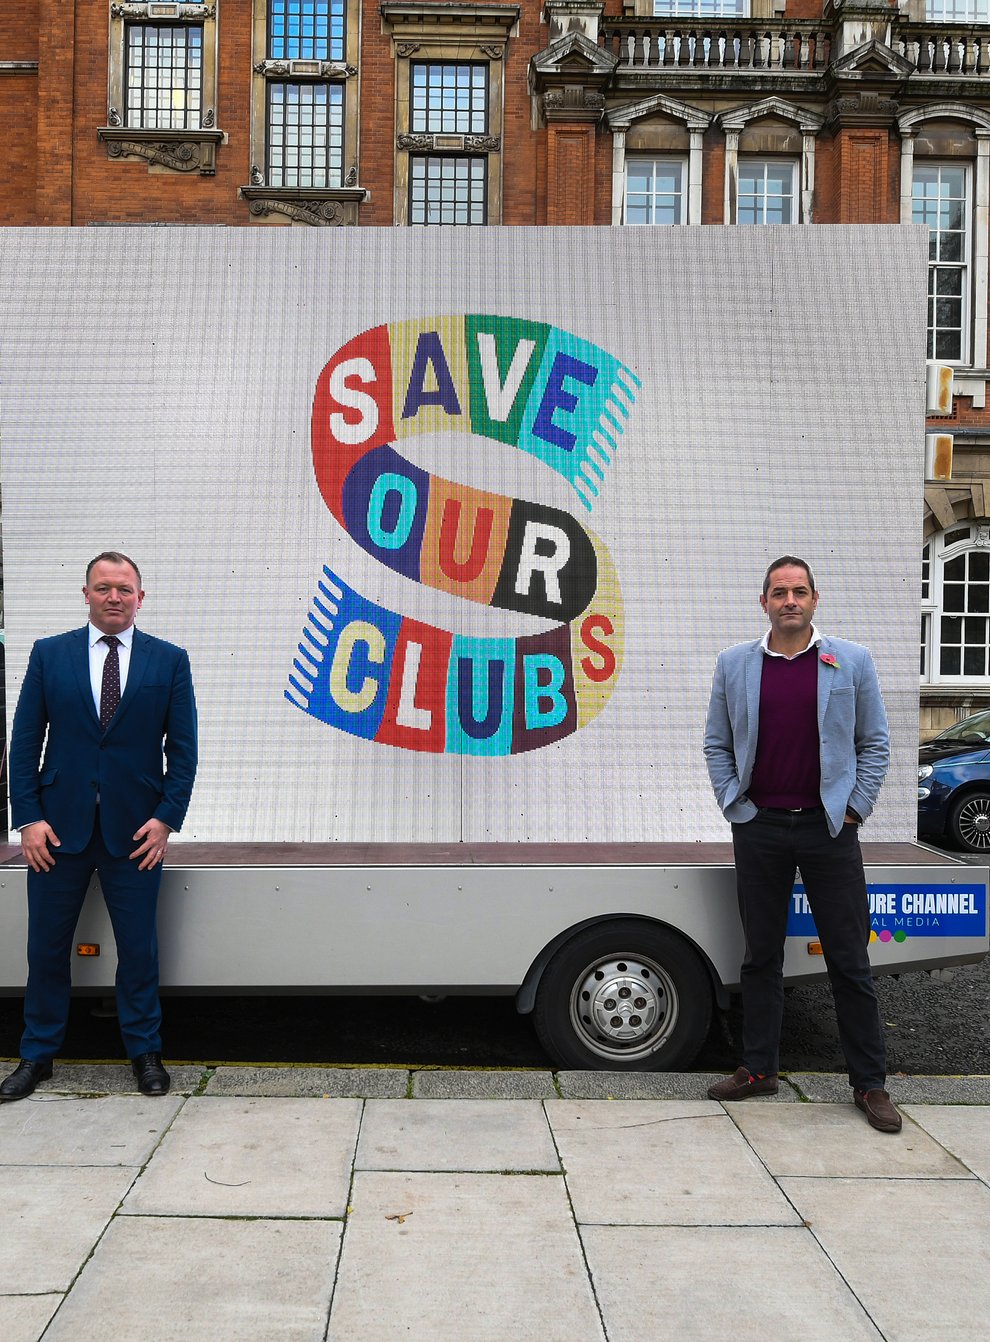 Fleetwood chief executive Steve Curwood (right) is part of the ‘Save Our Clubs’ campaign